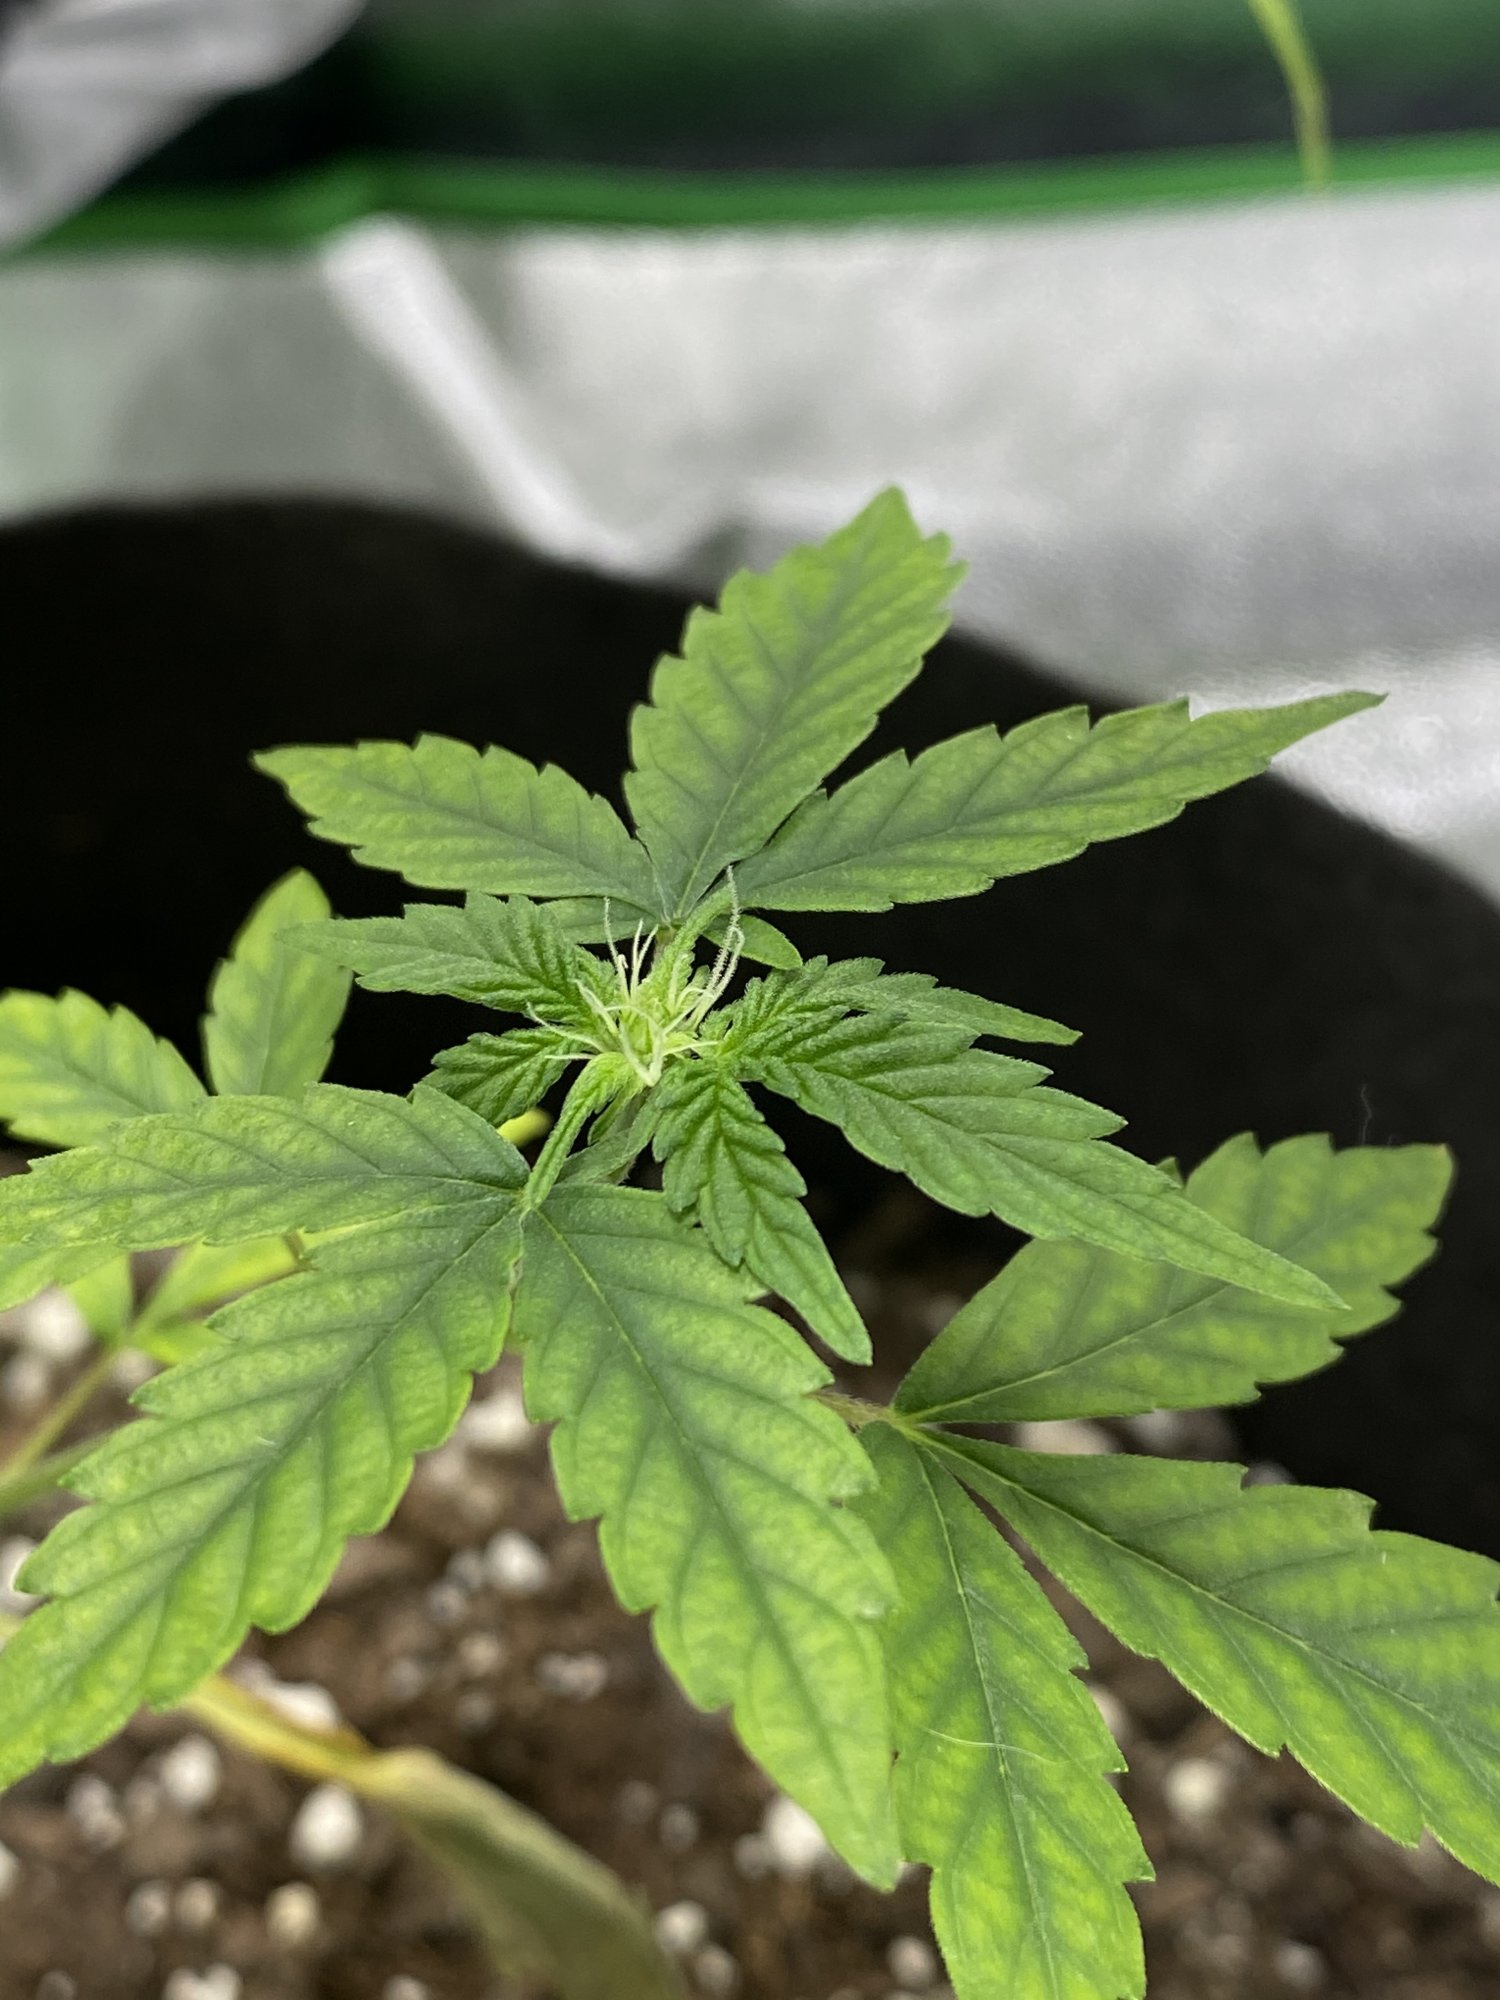 New to growing and need help 3